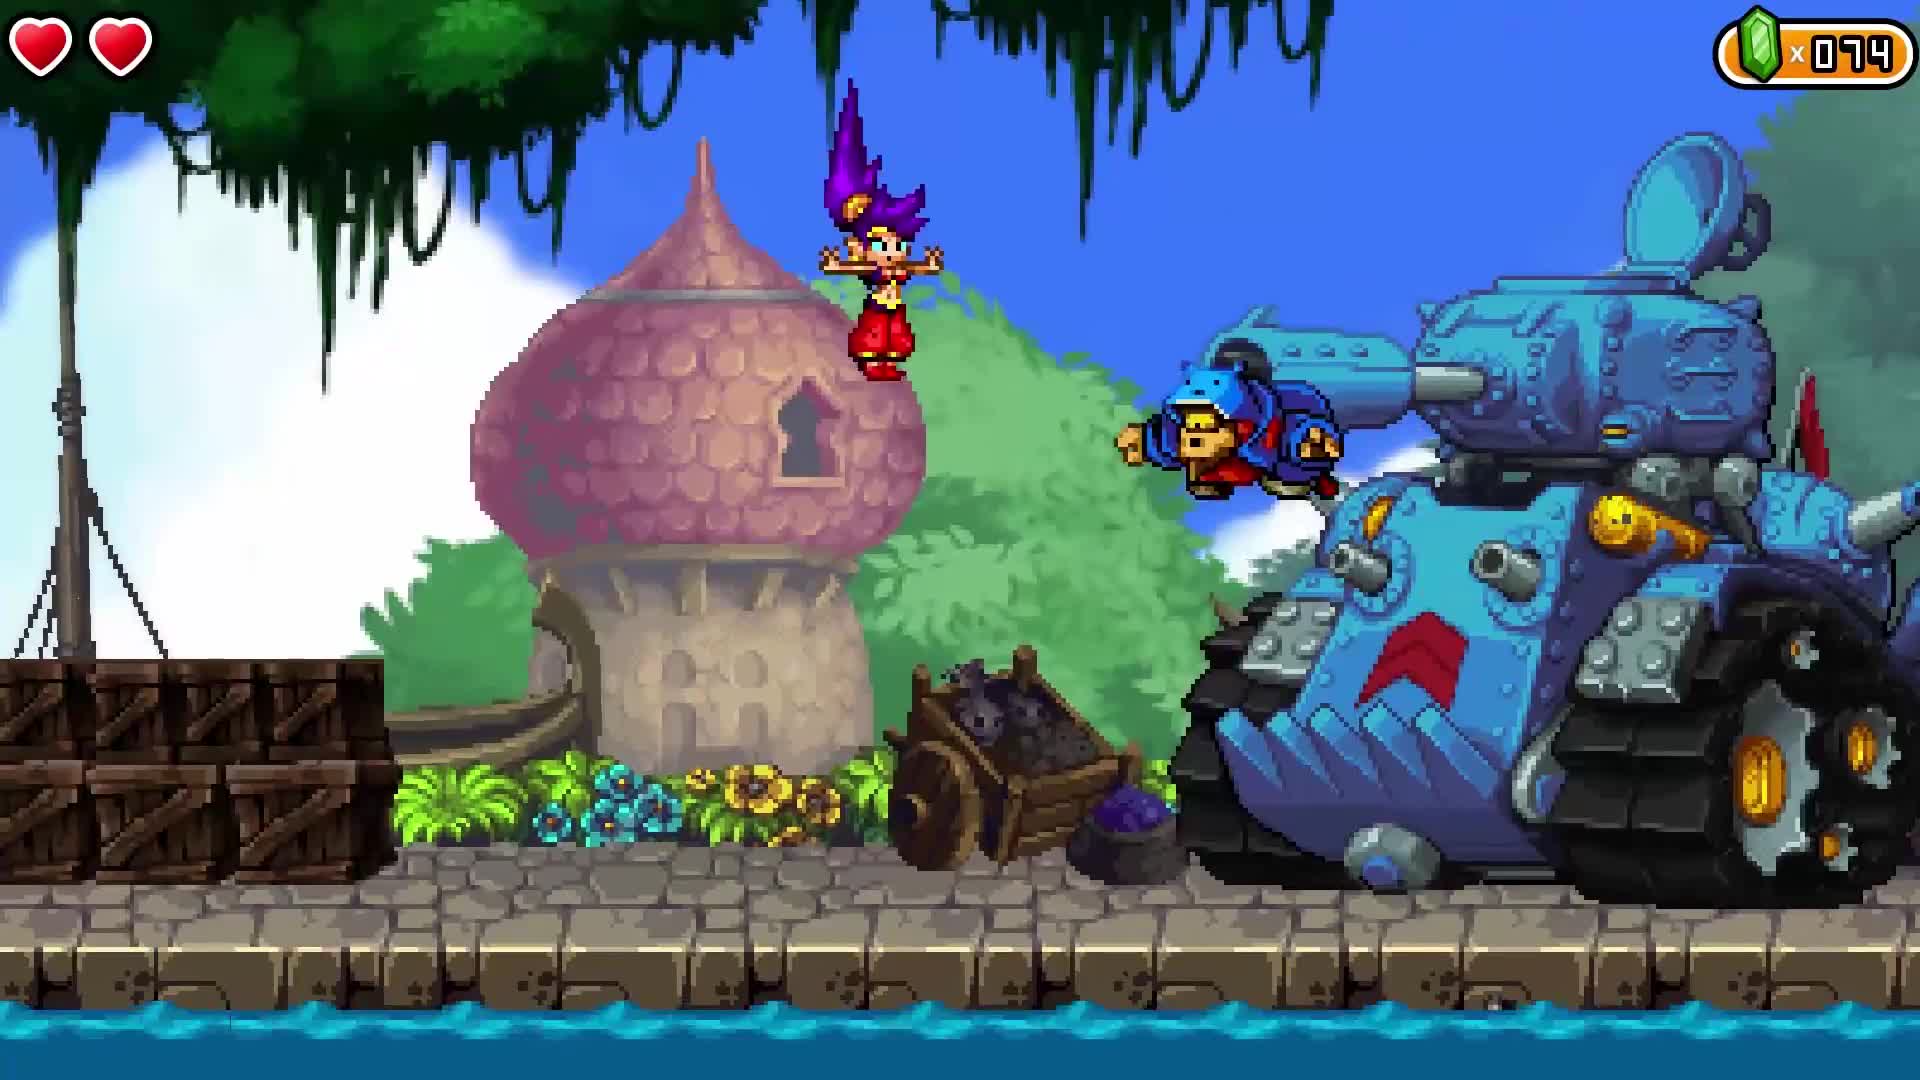 Shantae and the Pirate's Curse - Trailer